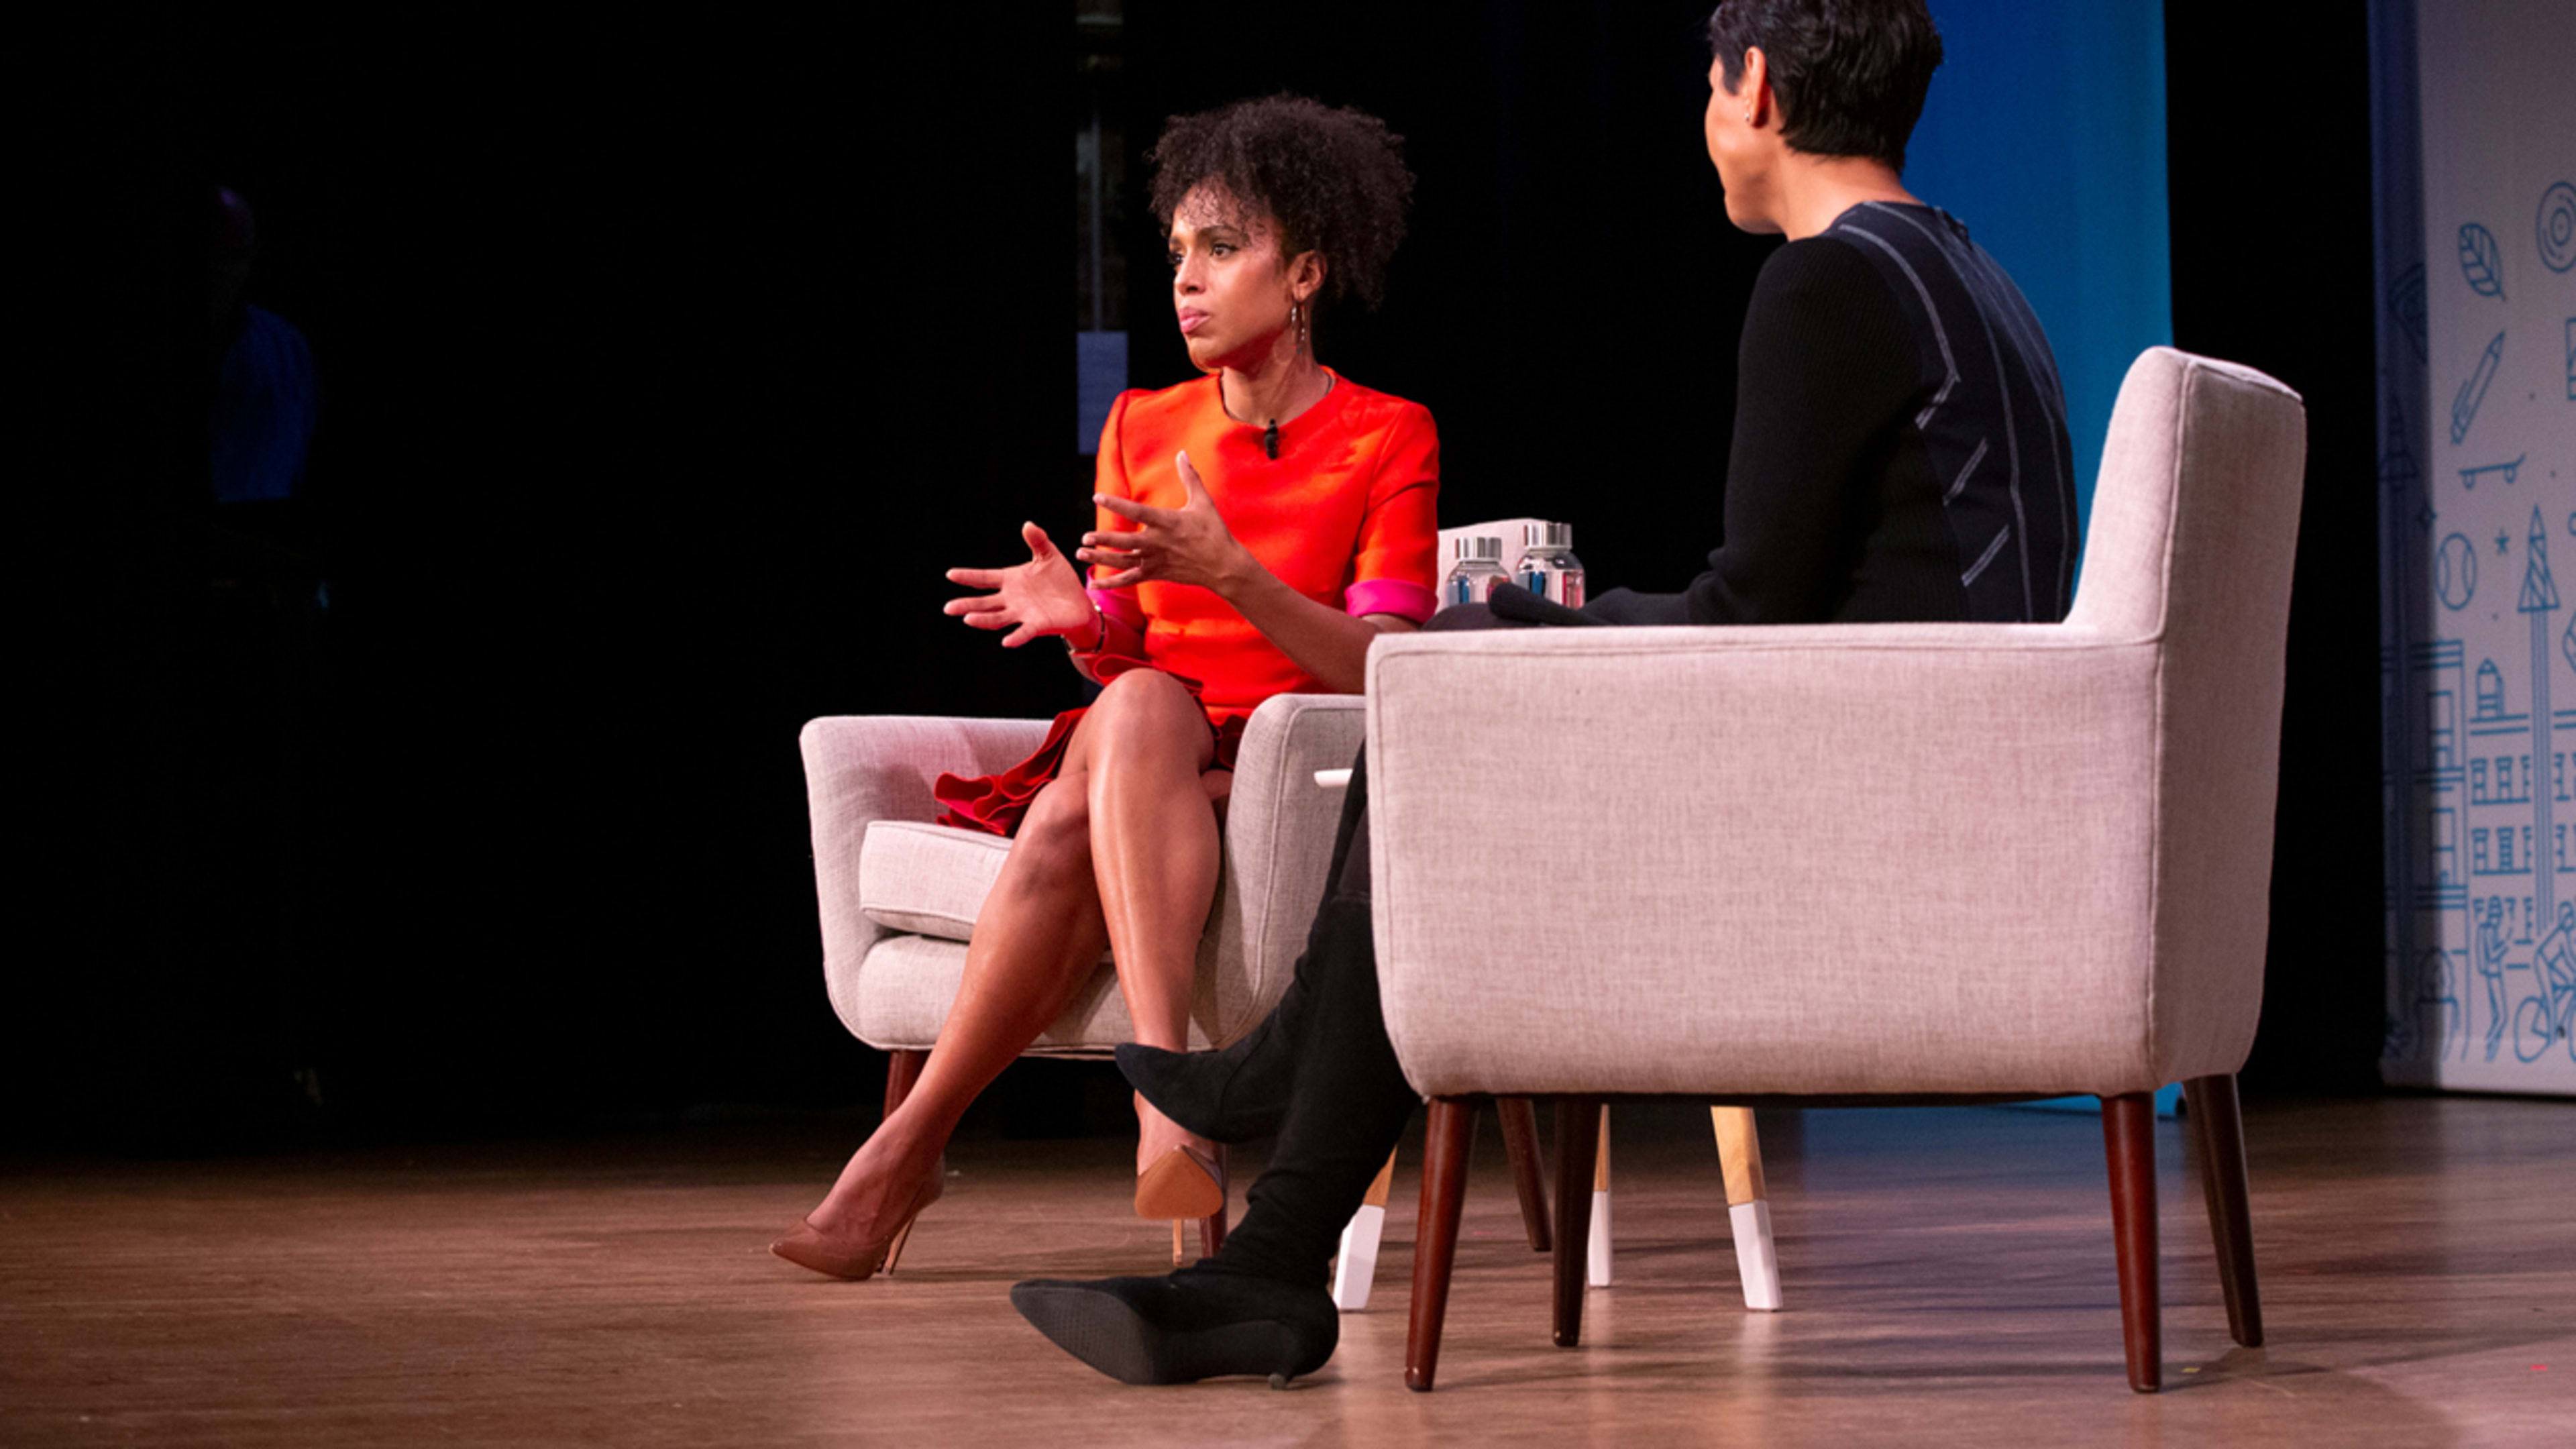 Kerry Washington: “Anita Hill taught me what fearlessness really is”